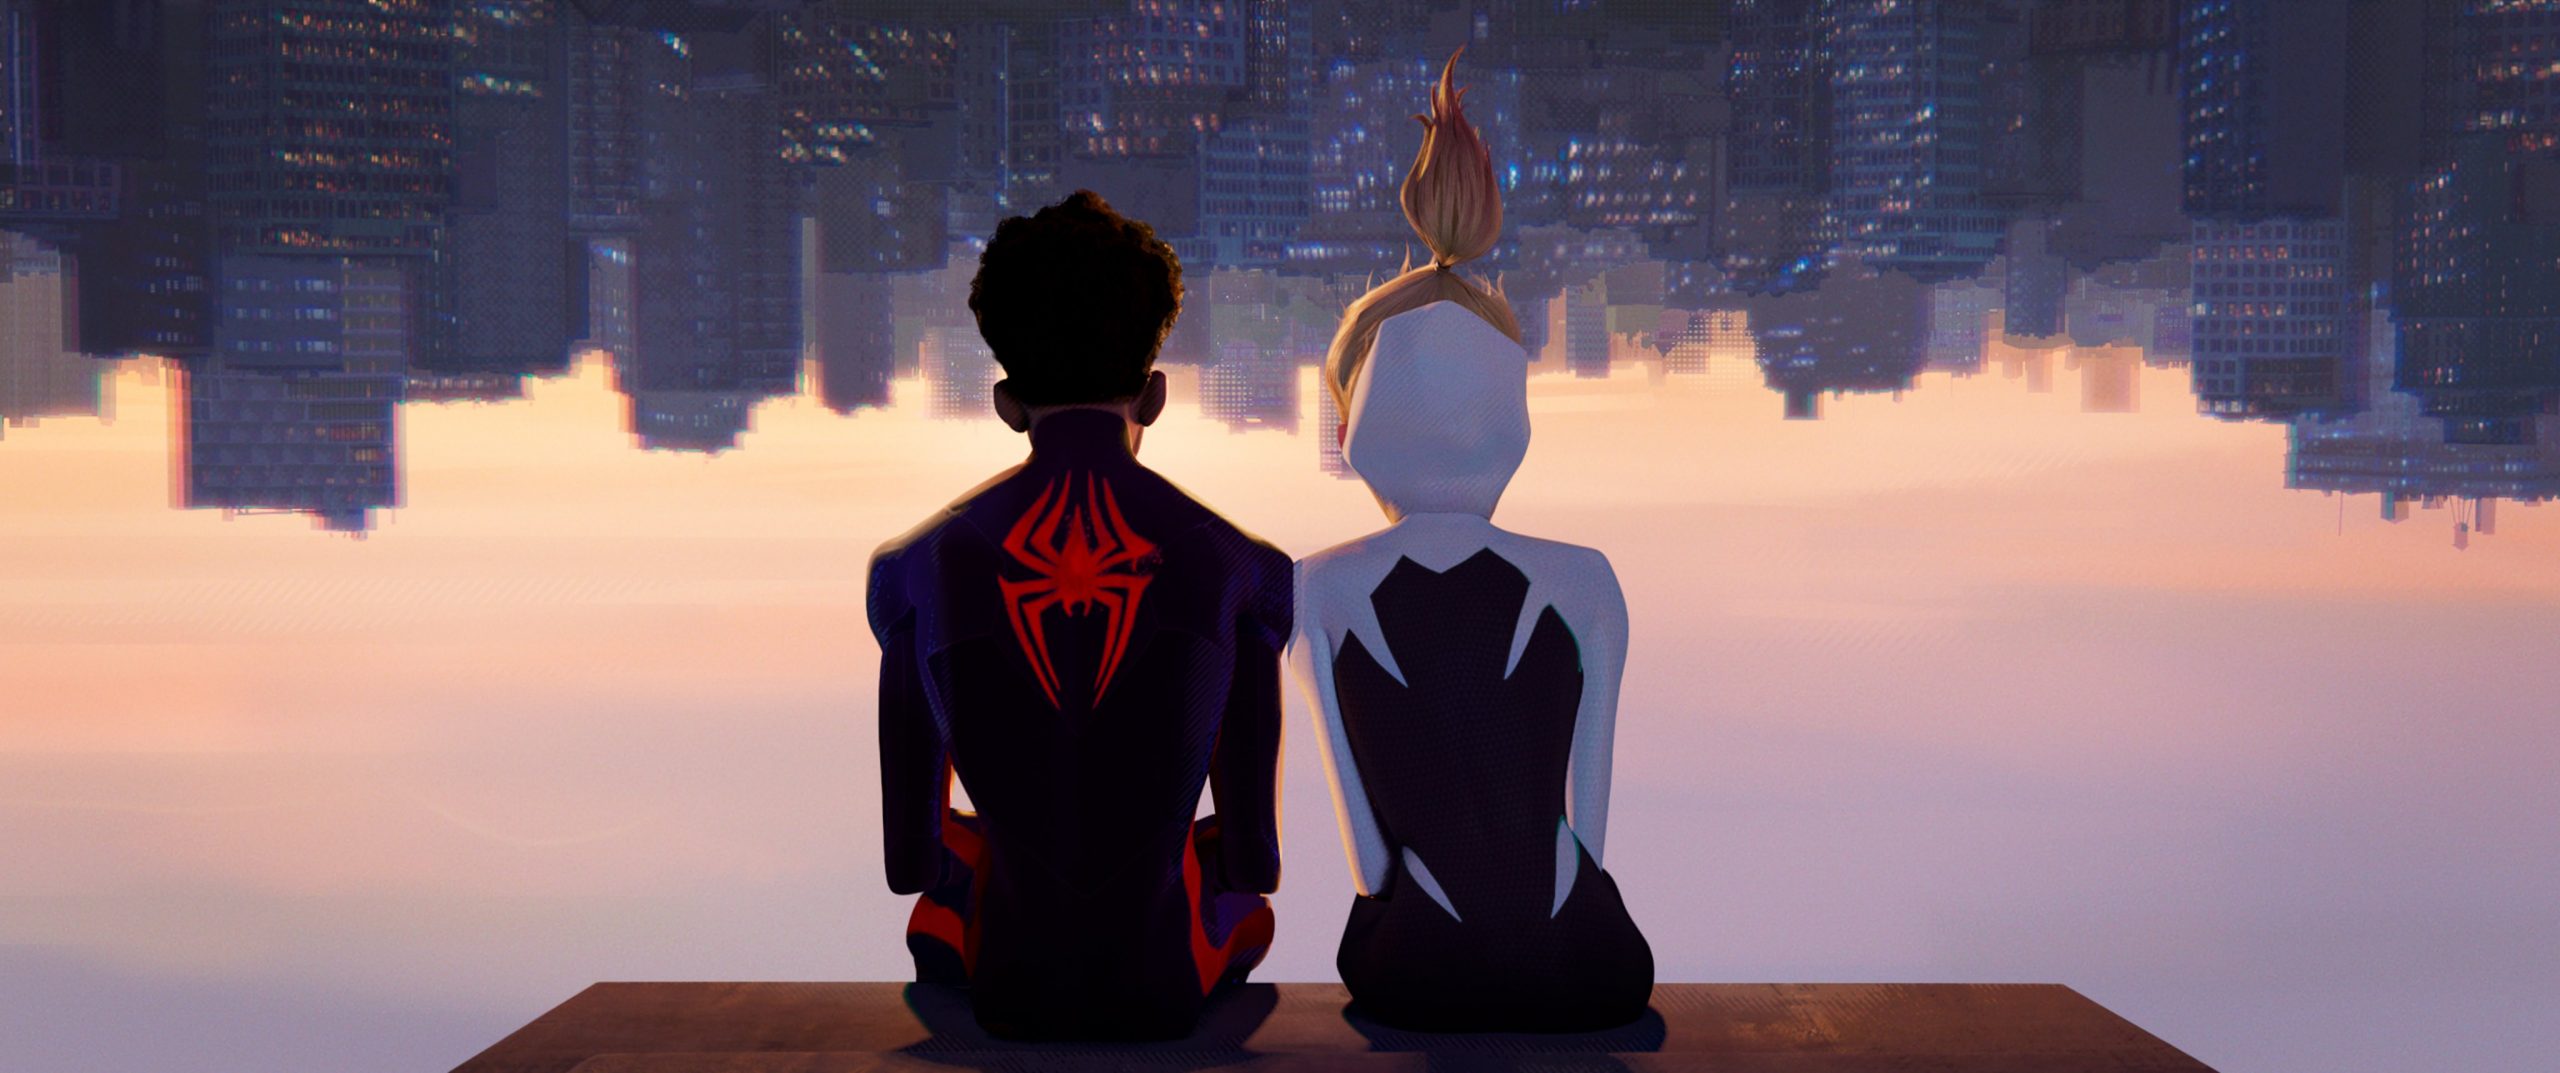 Miles Morales and Gwen Stacy sitting side by side